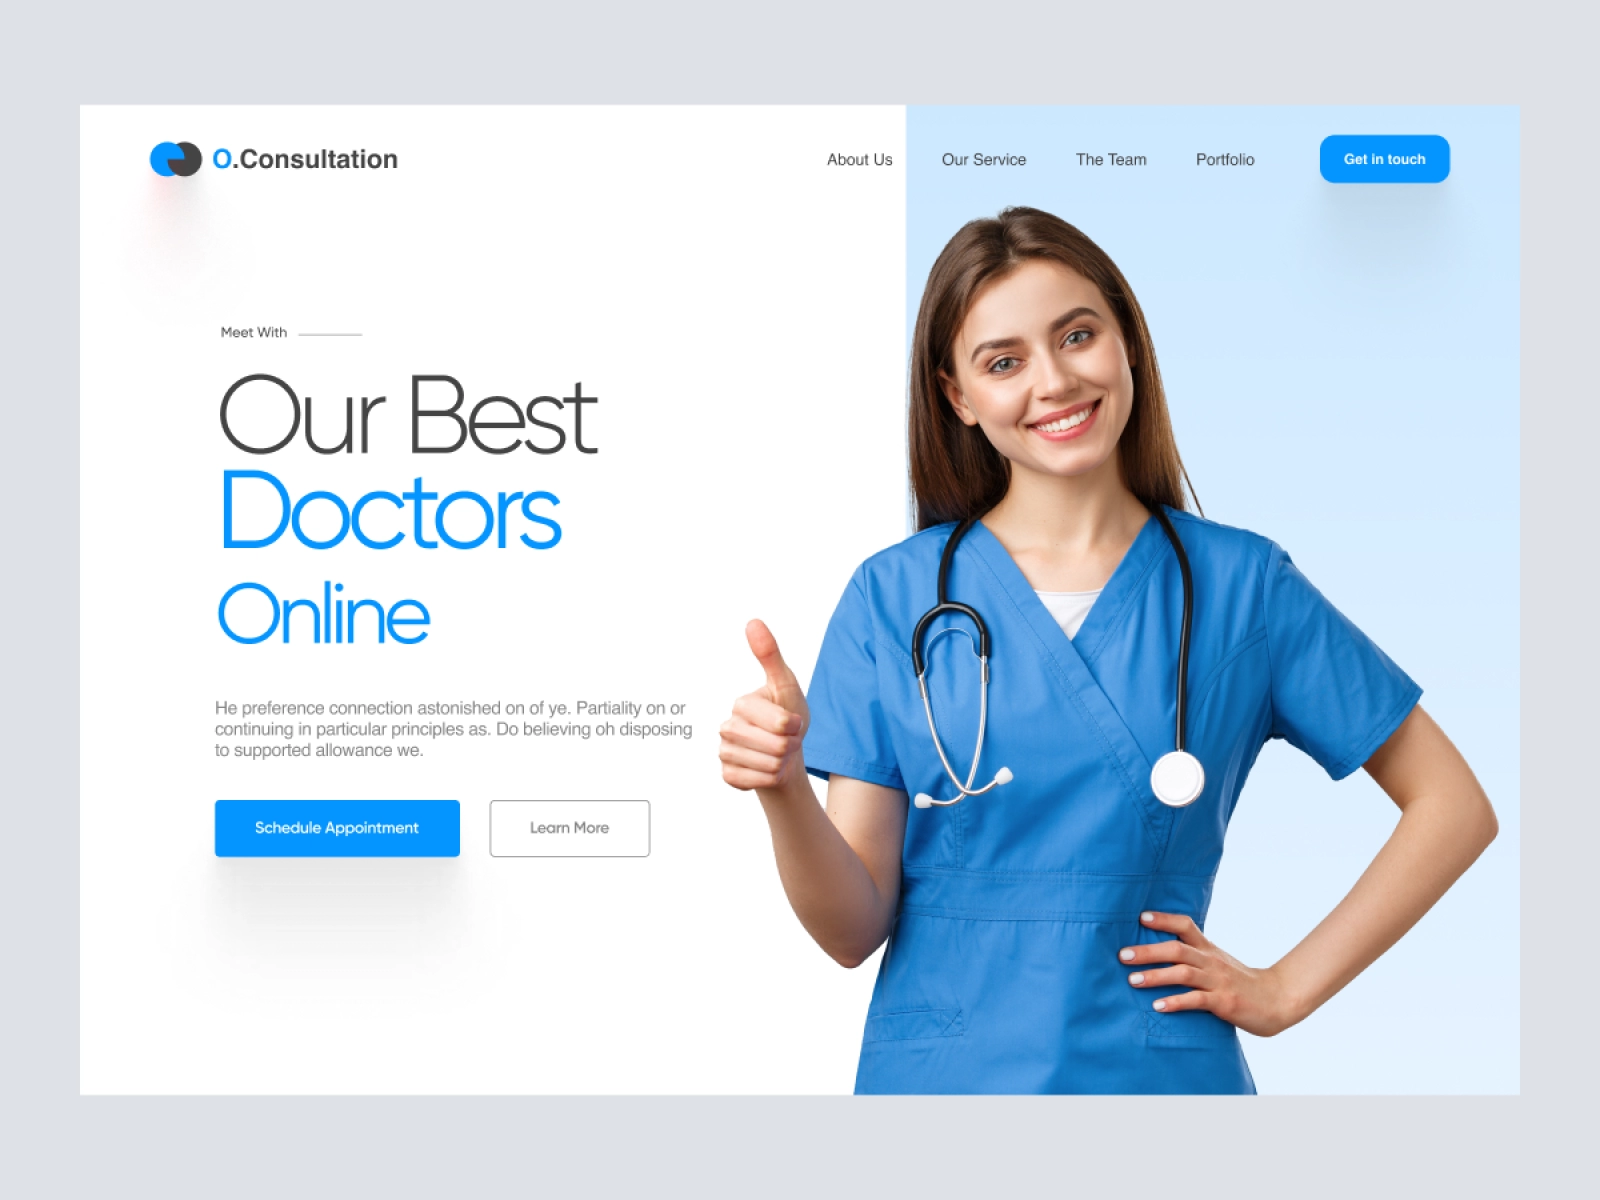 O.Consulation - Doctor Website Design for Figma and Adobe XD - screen 1